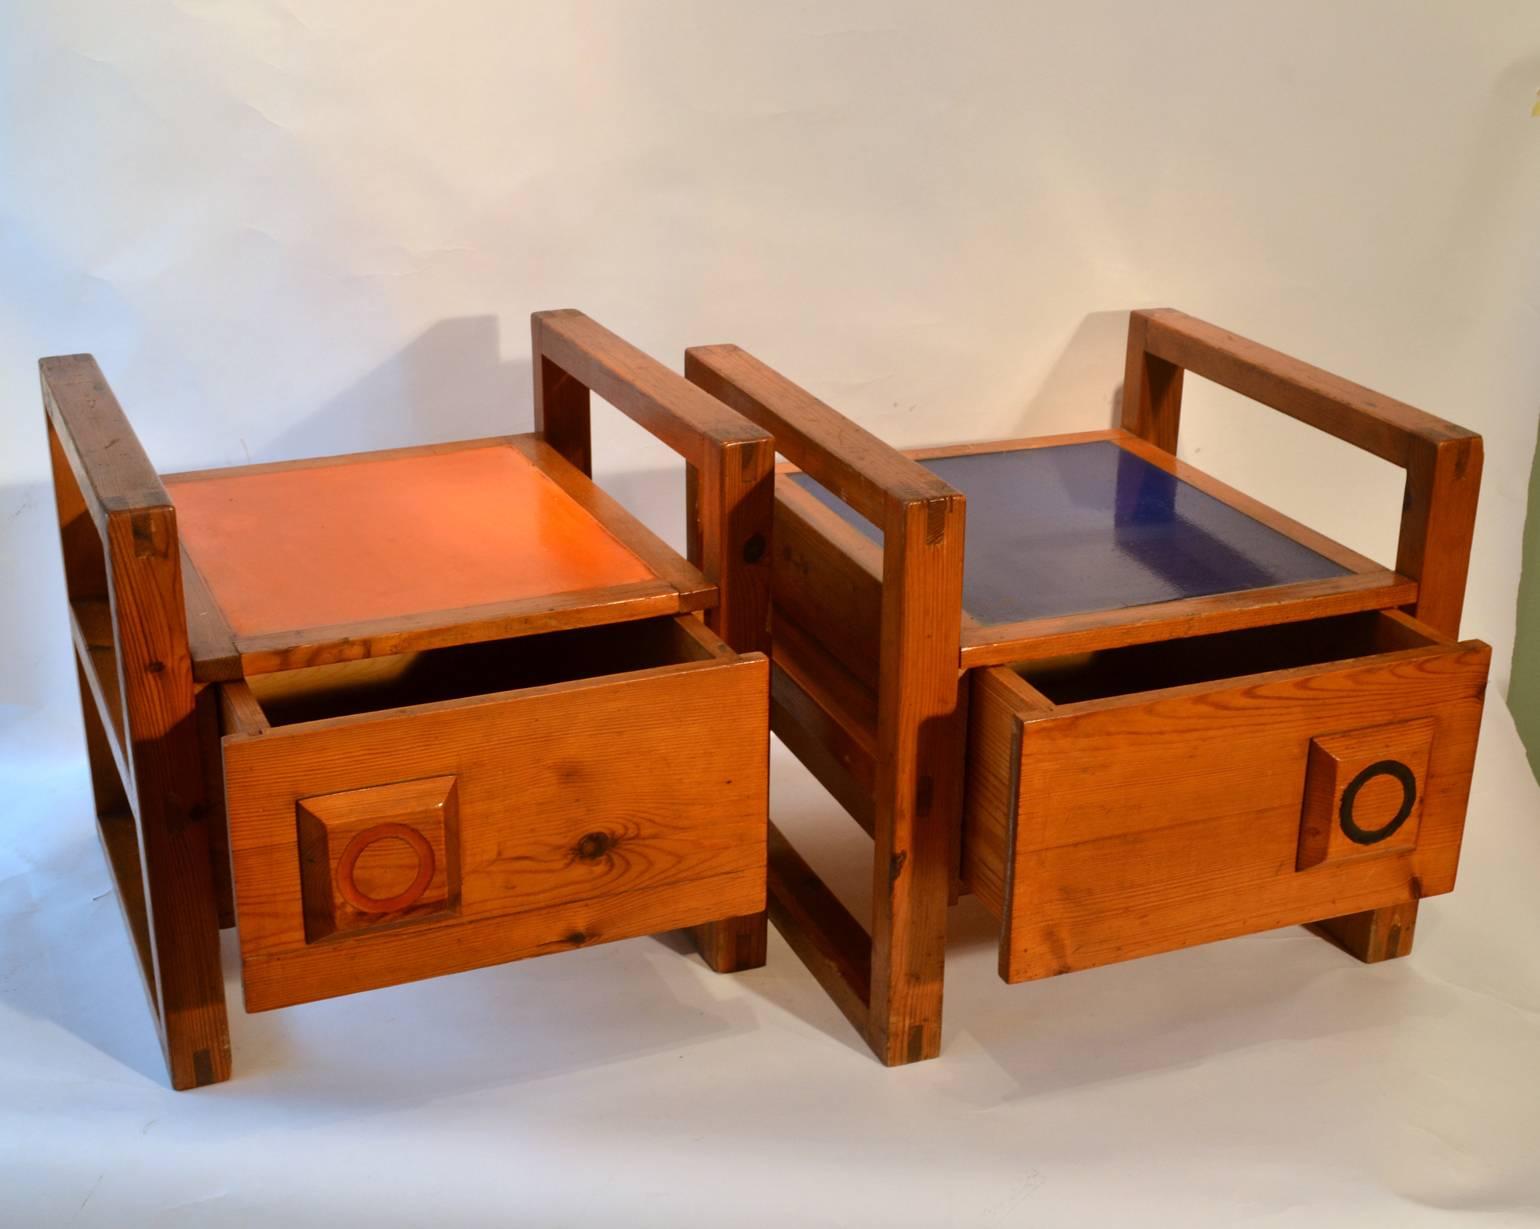 Pitch pine modernist nightstand pair both have a coated top, one in orange and one in blue, with matching details on the drawers. The side tables have simple lines with dovetail joint construction and one drawer each.
Ideal as bedside tables.